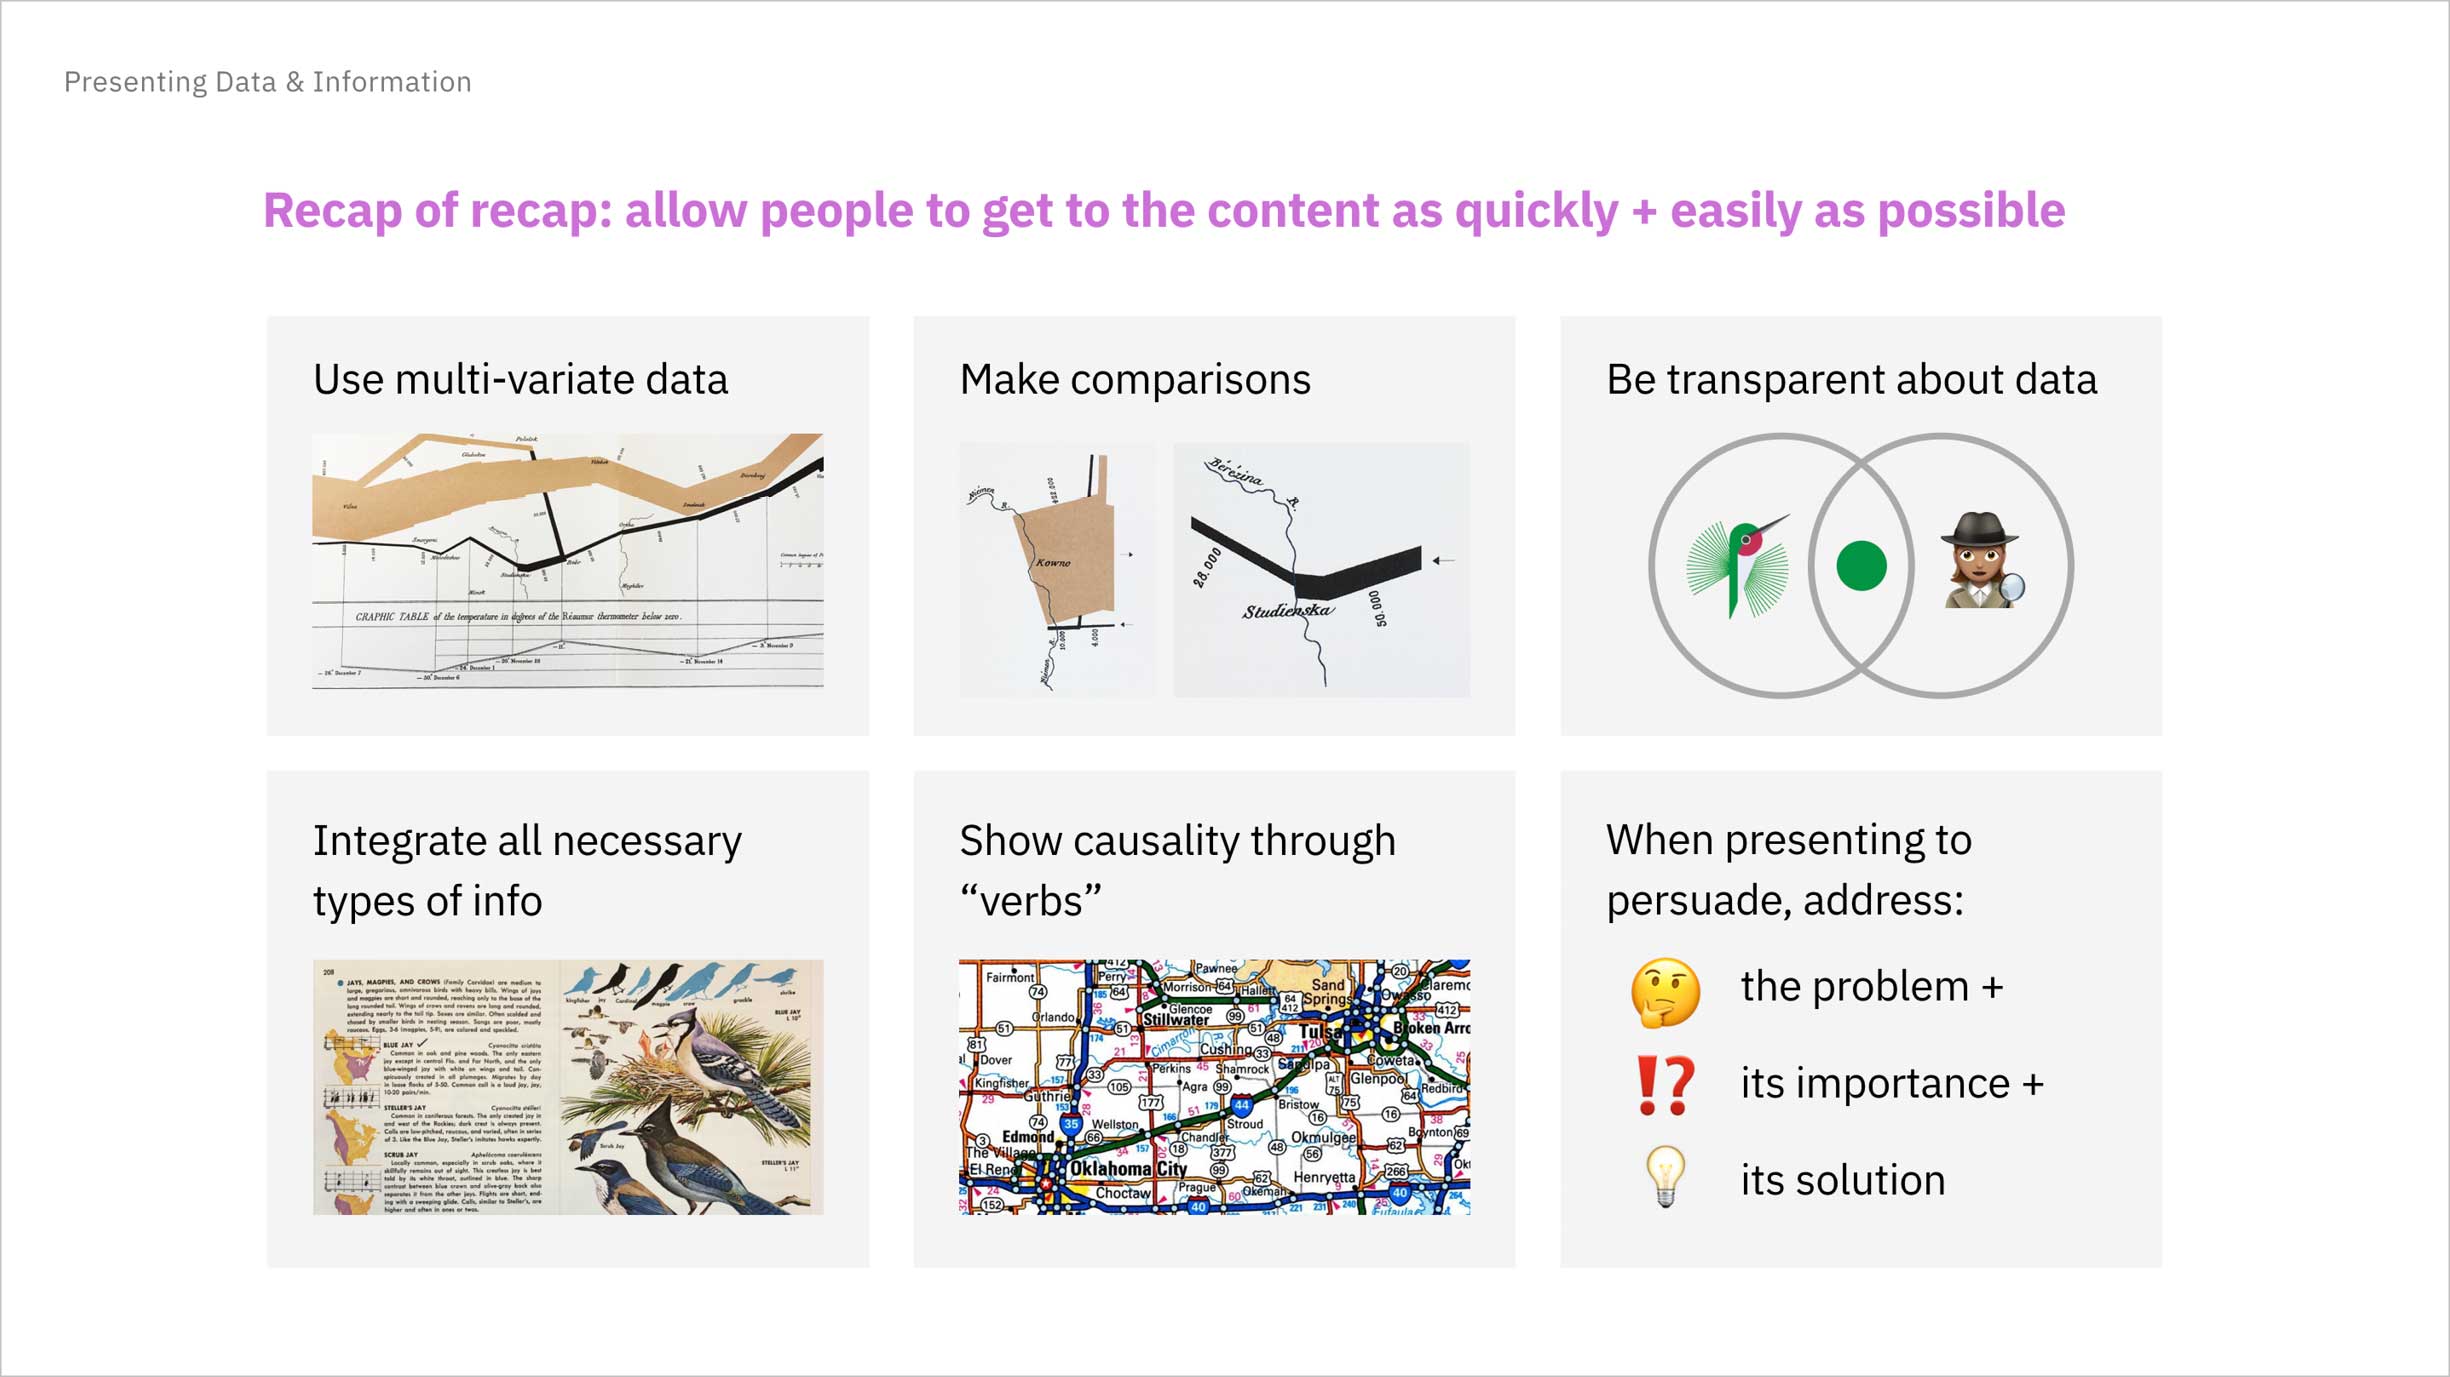 In short, allow people to get to the content as quickly + easily as possible.